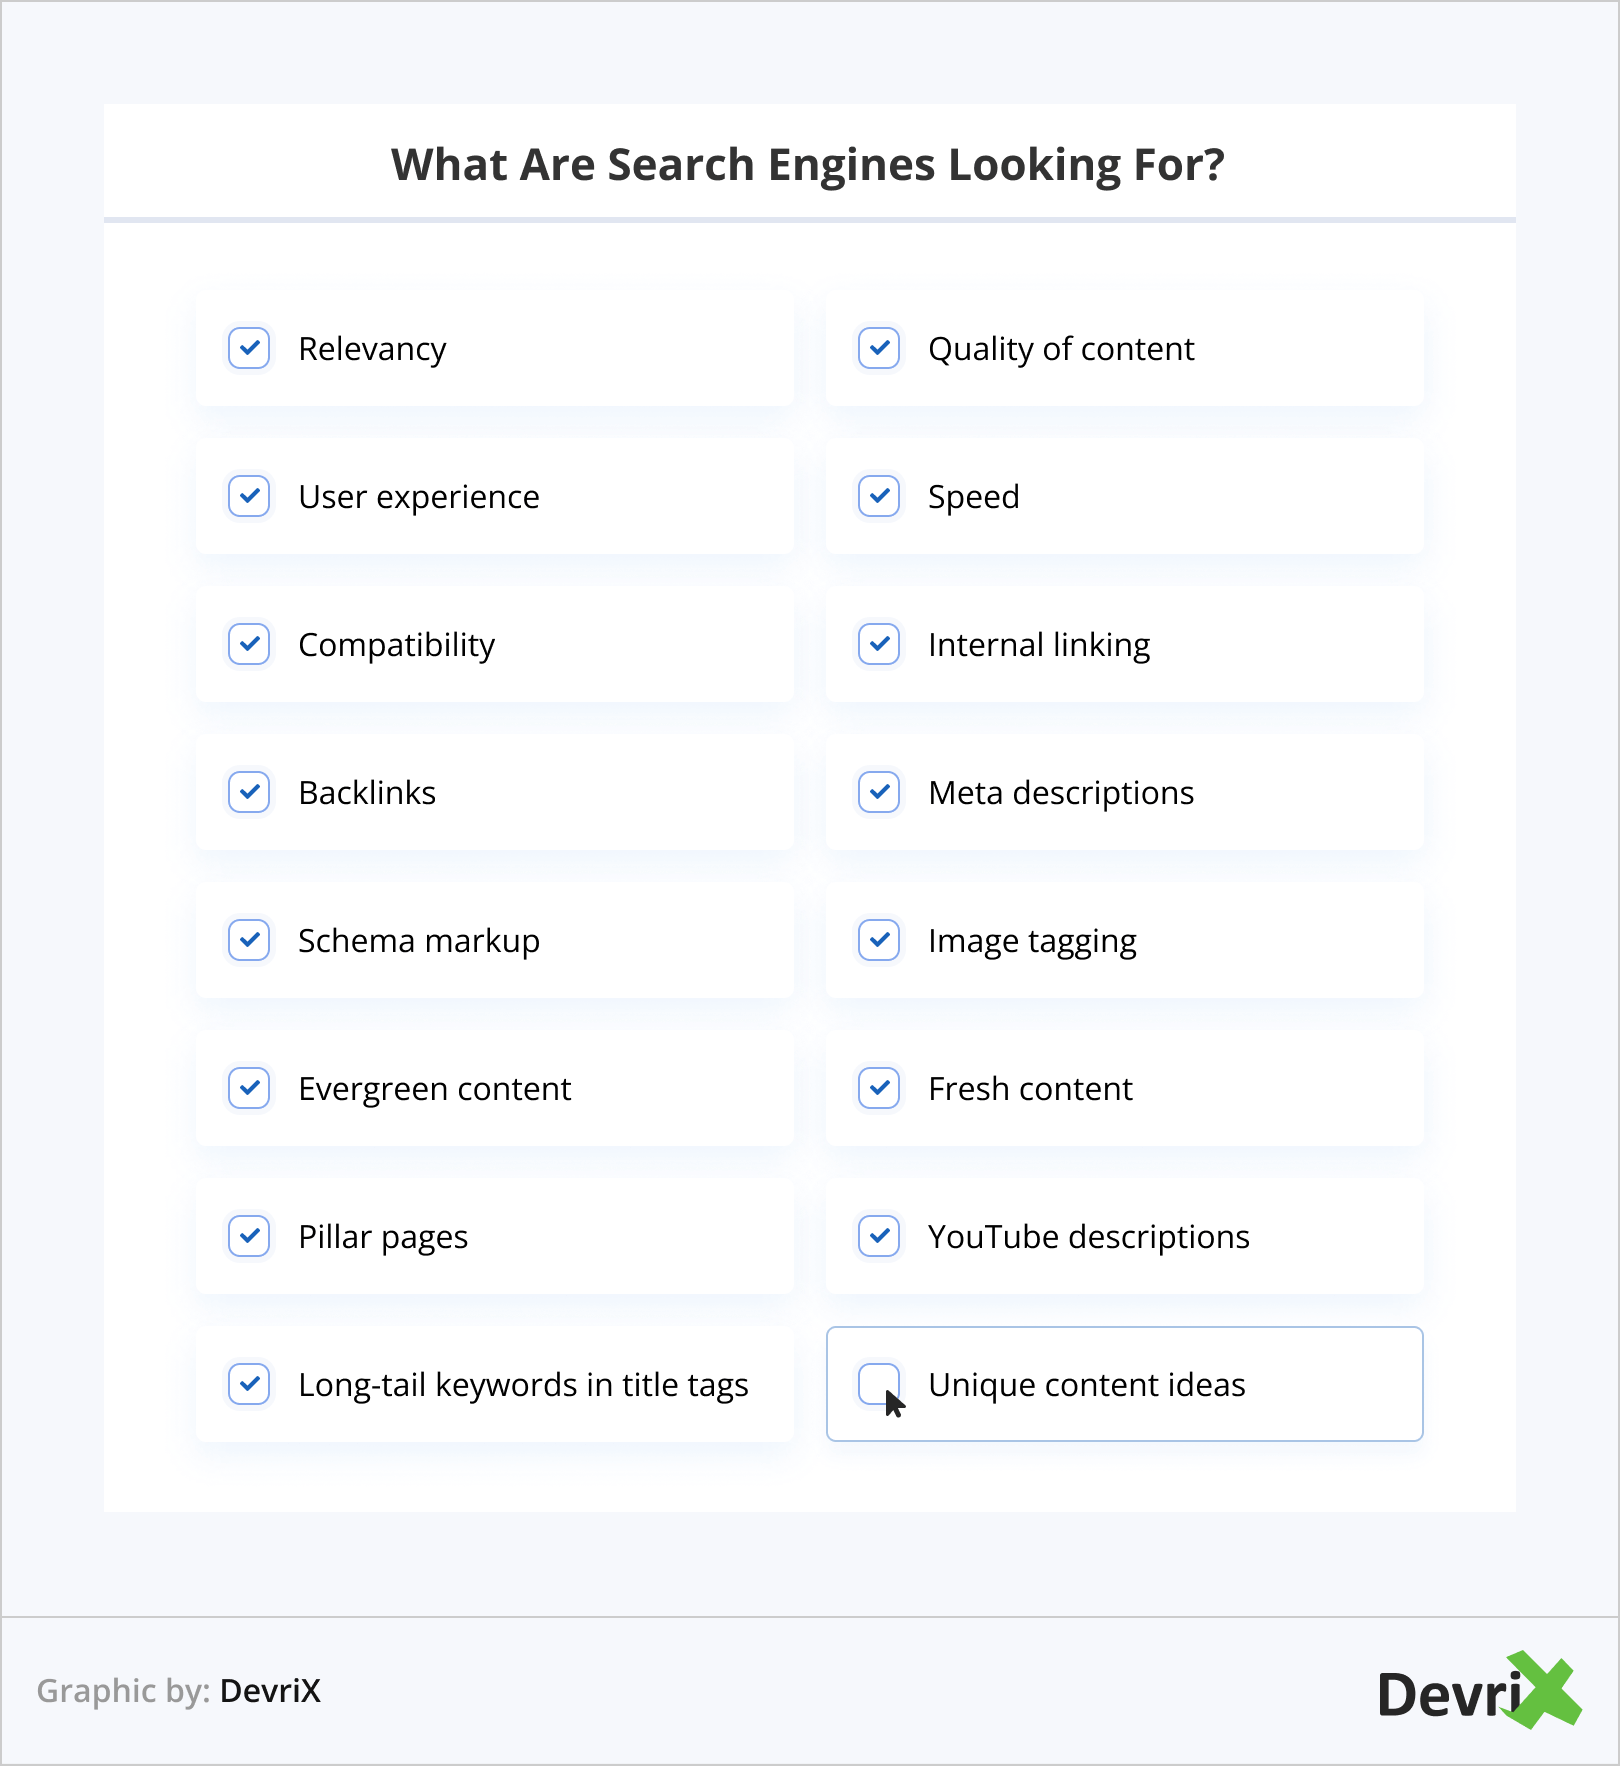 What Are Search Engines Looking For